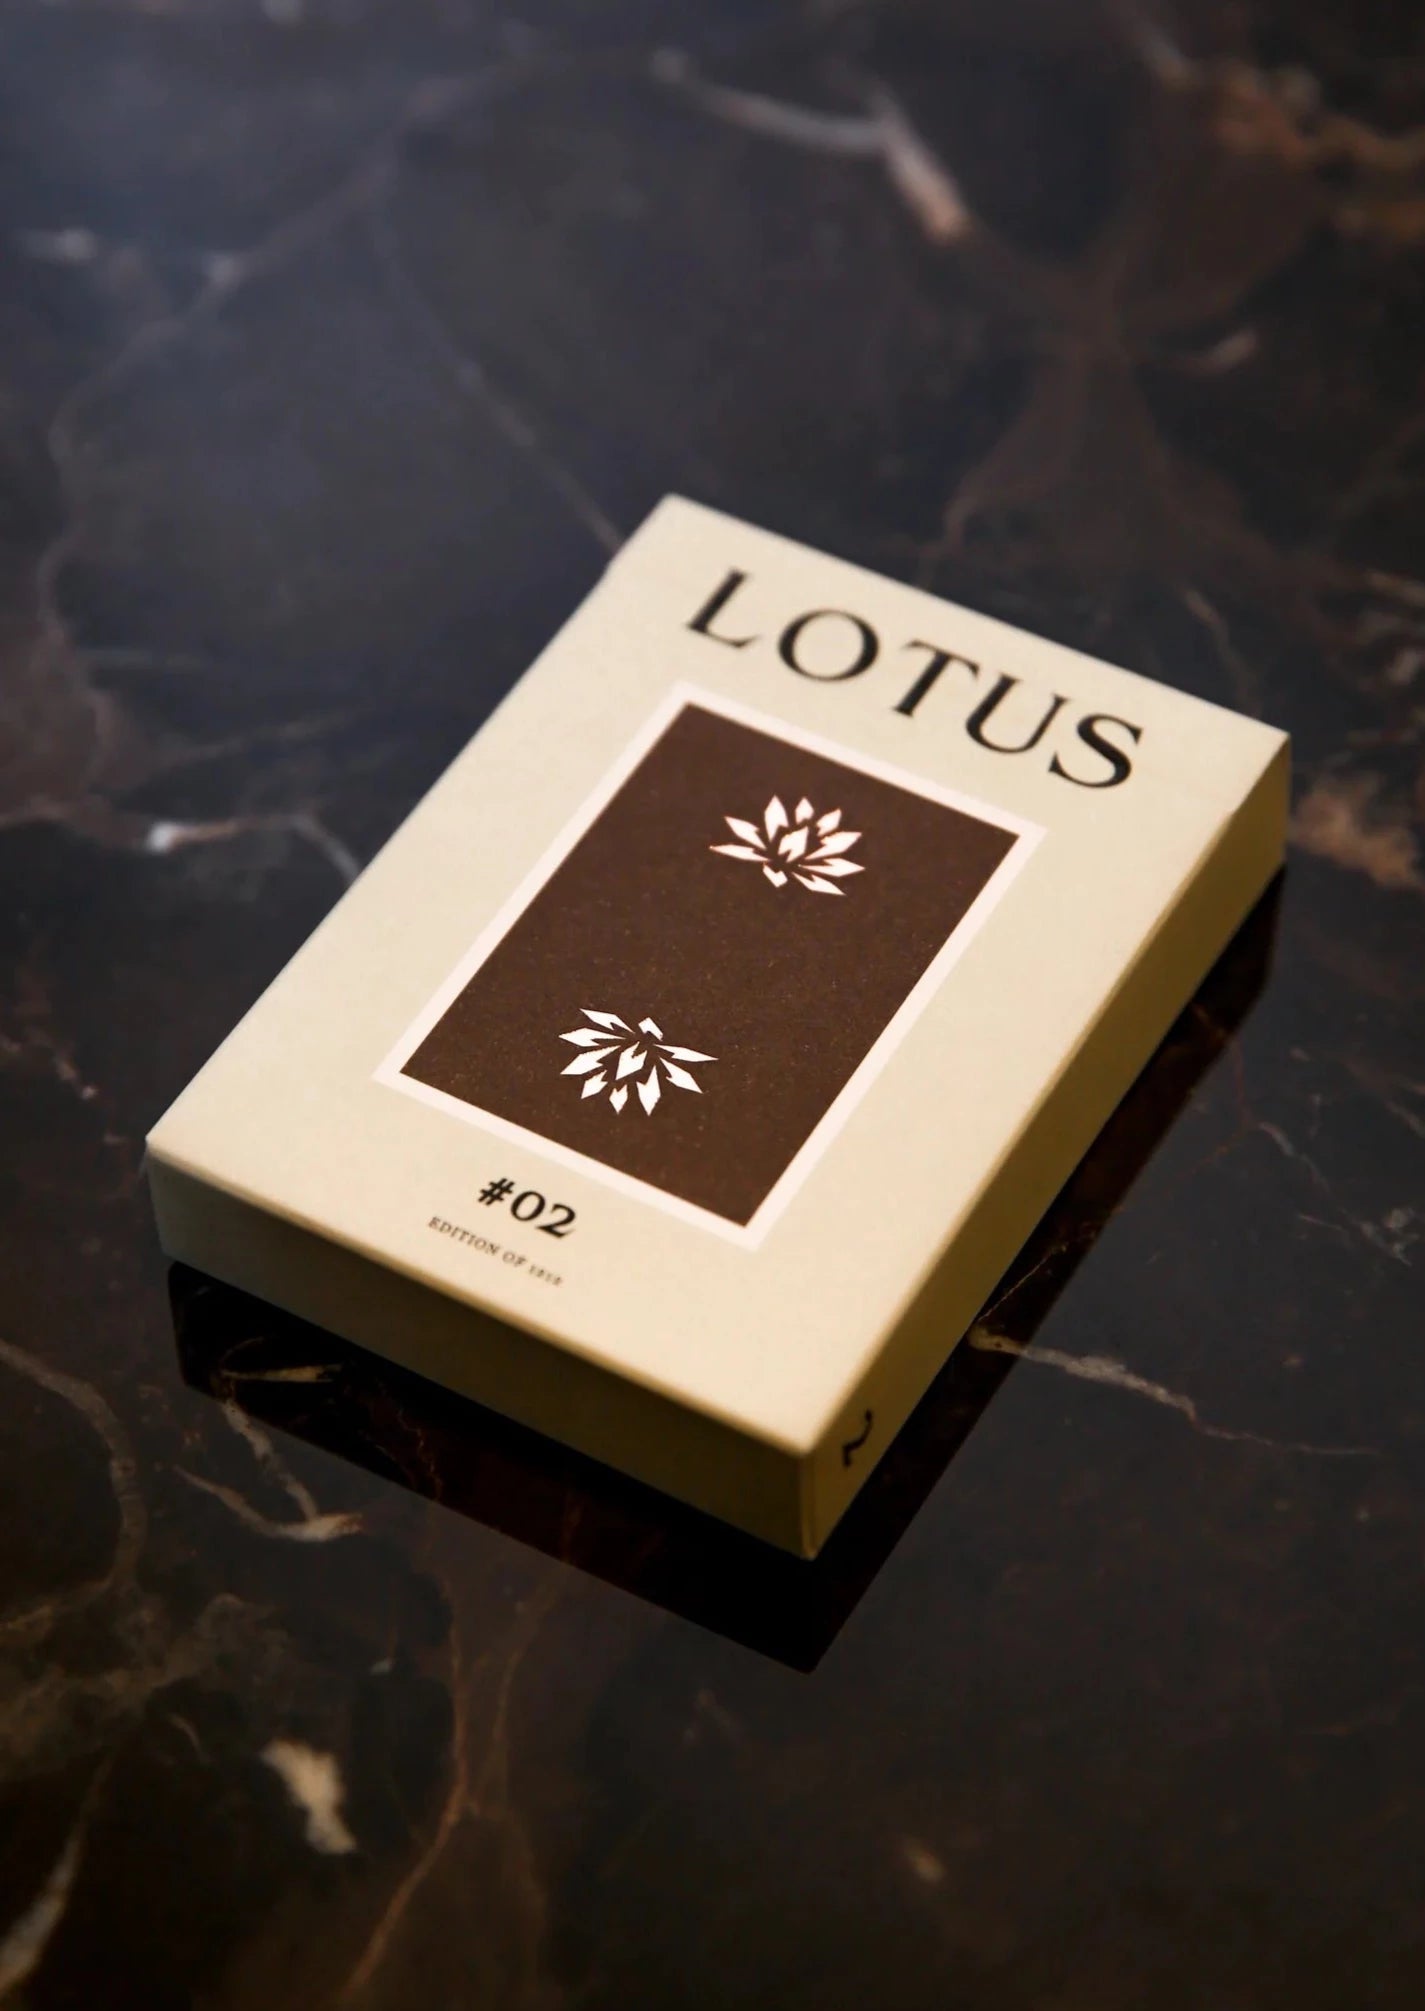 lotusinhand 02 playing cards Edition of 1212. Printed in Taiwan by Dex Playing Card Co.